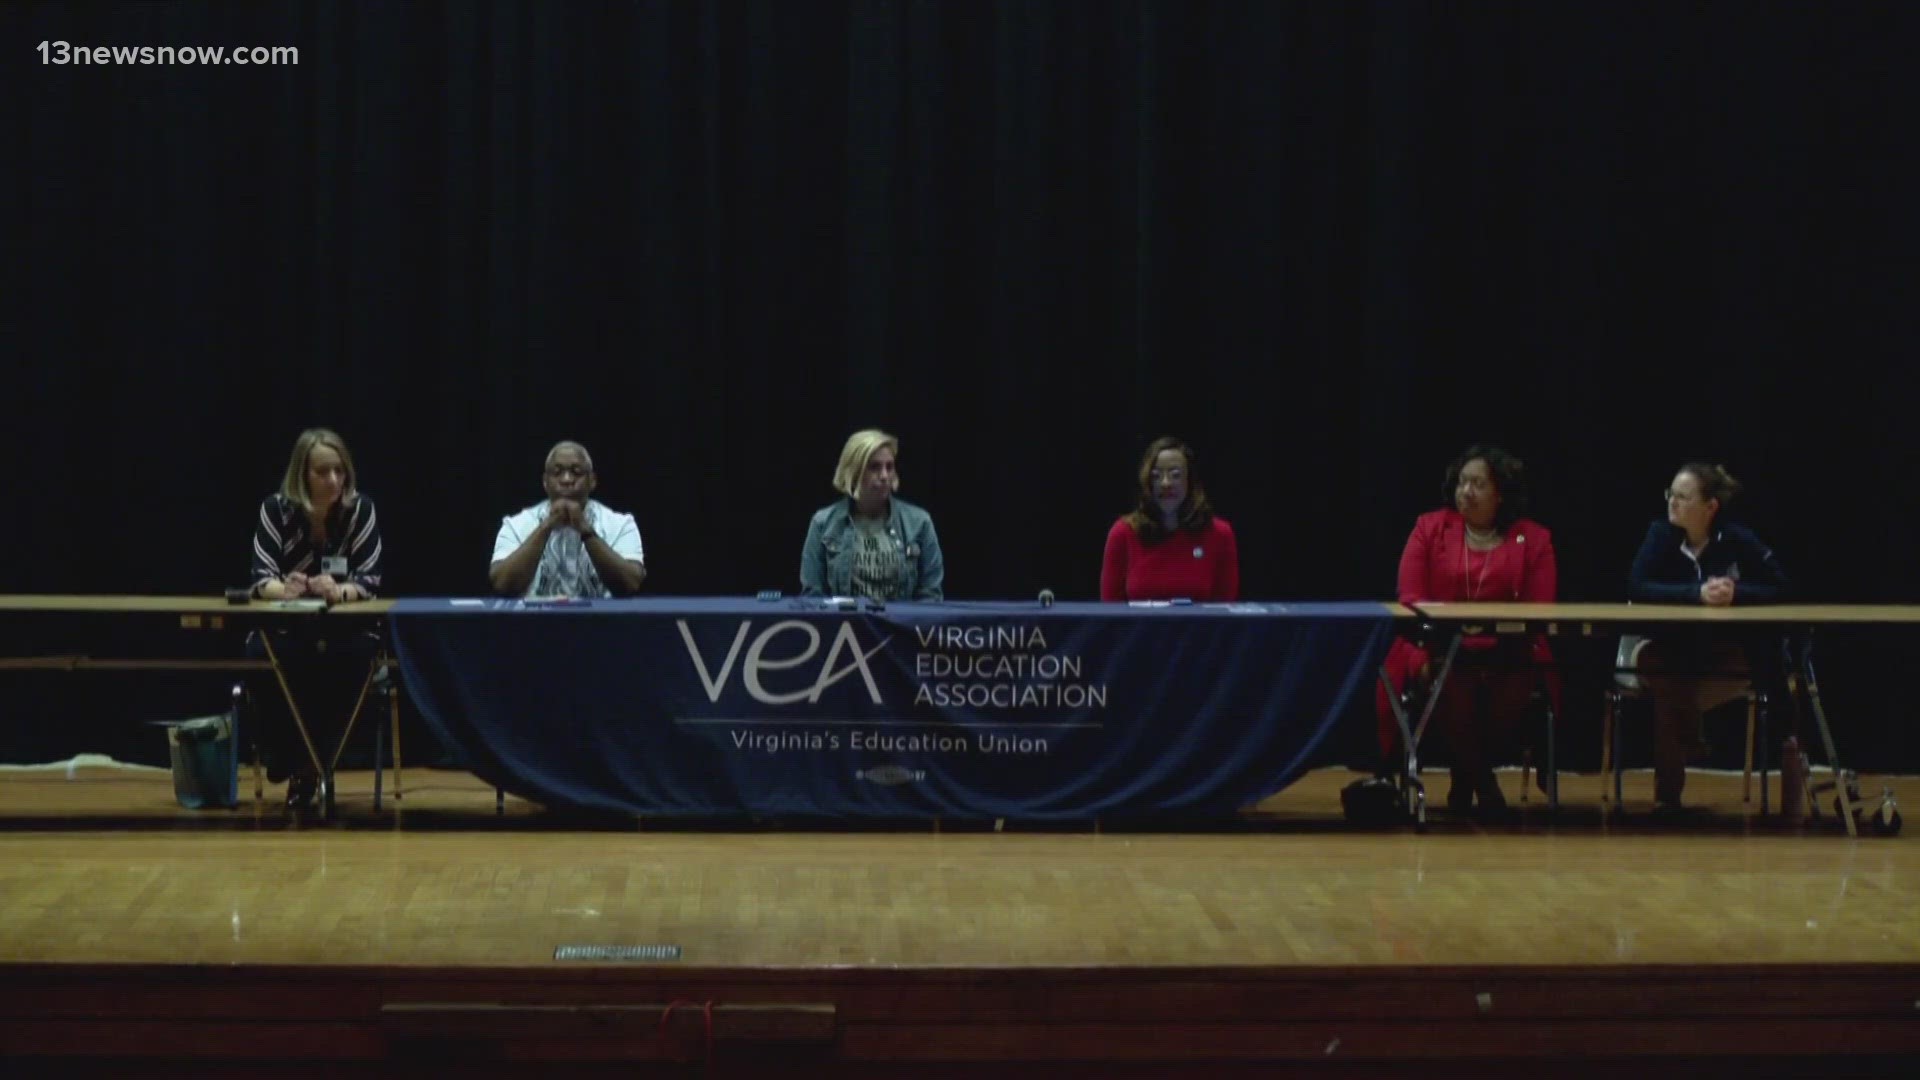 An uptick in behavioral incidents among students became one focal point of discussion at this forum hosted by the Virginia Education Association.